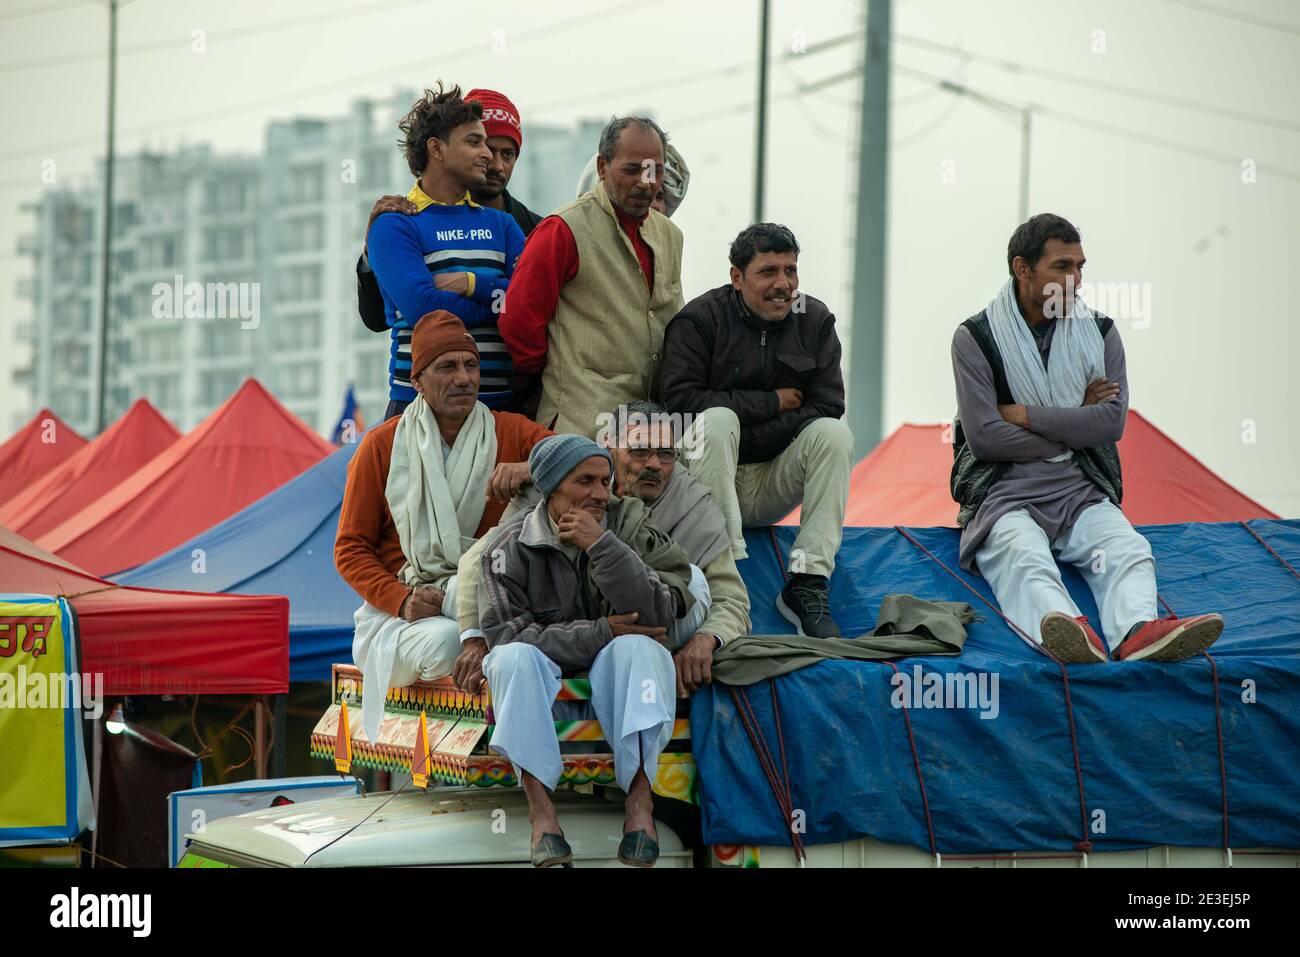 Protesters are seen watching women's kabaddi match.Dilli Chalo' farmers' agitation has entered its 54th day. The tenth round of talks between the Centre and the leaders of farmers' unions is expected to be held tomorrow. Stock Photo